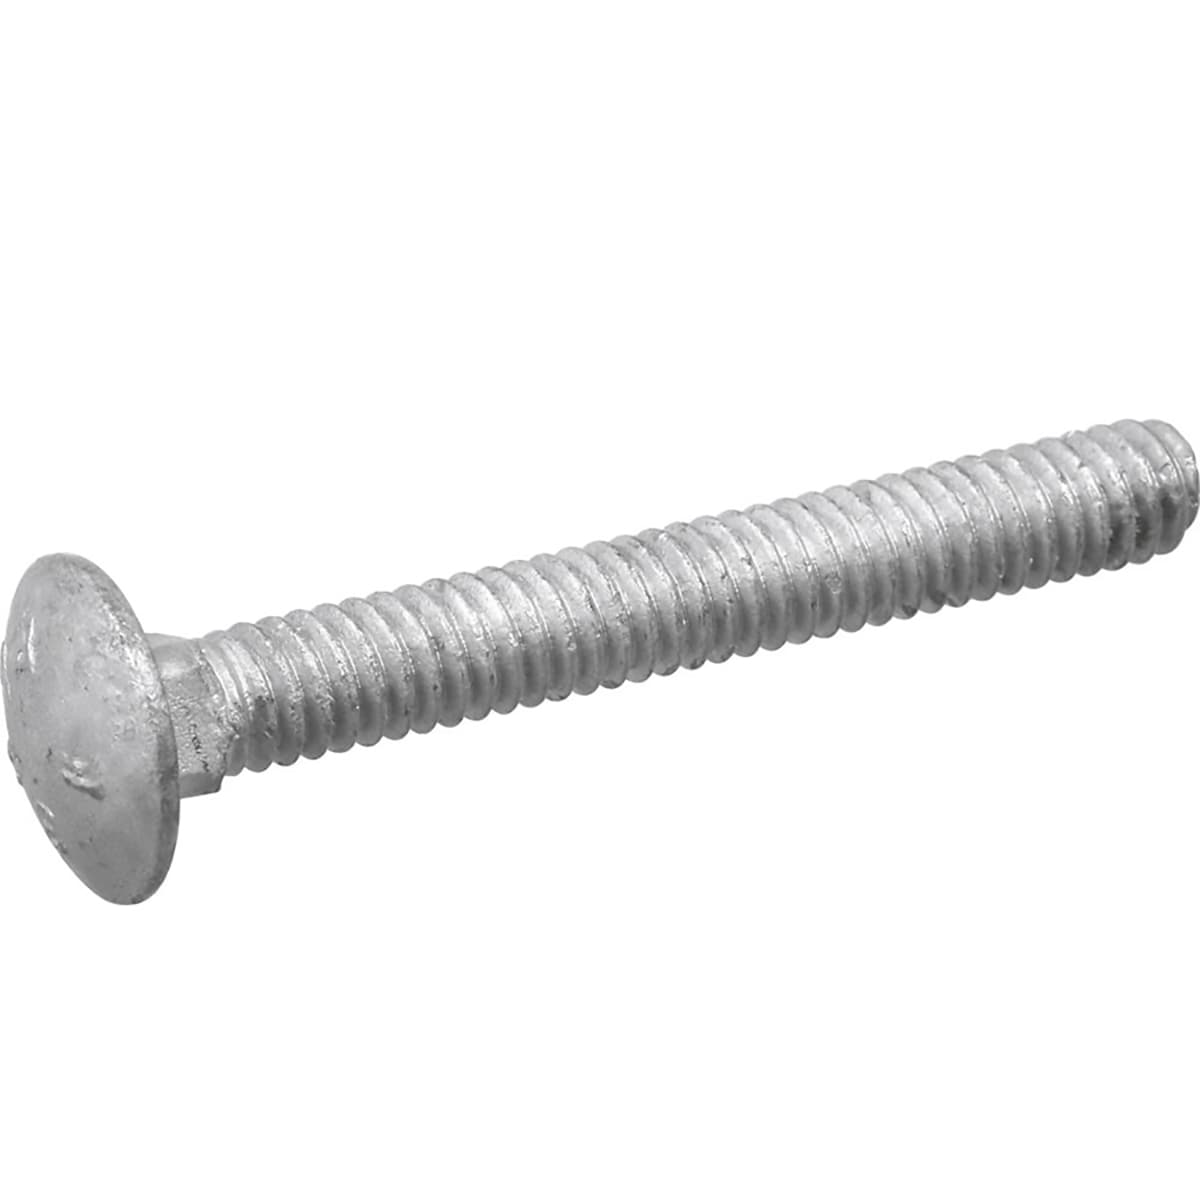 3/8"-16 X 5-1/2 Carriage Bolt Assembly Hot Dipped Galvanized With Nuts & Washers 